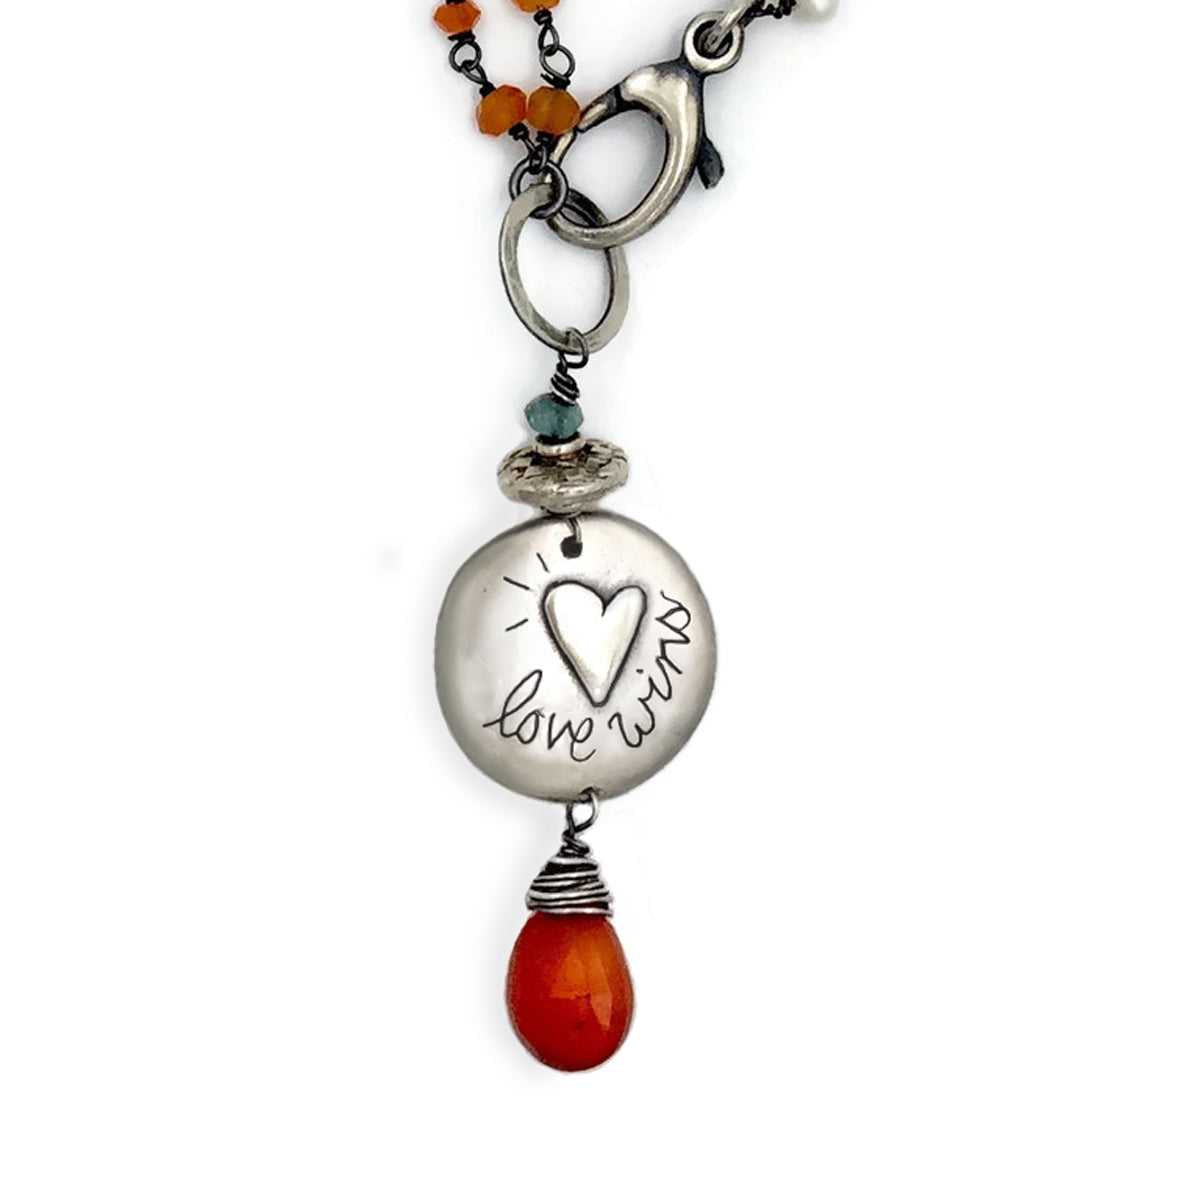 Love Wins on Rosary Chain - 18 Inches